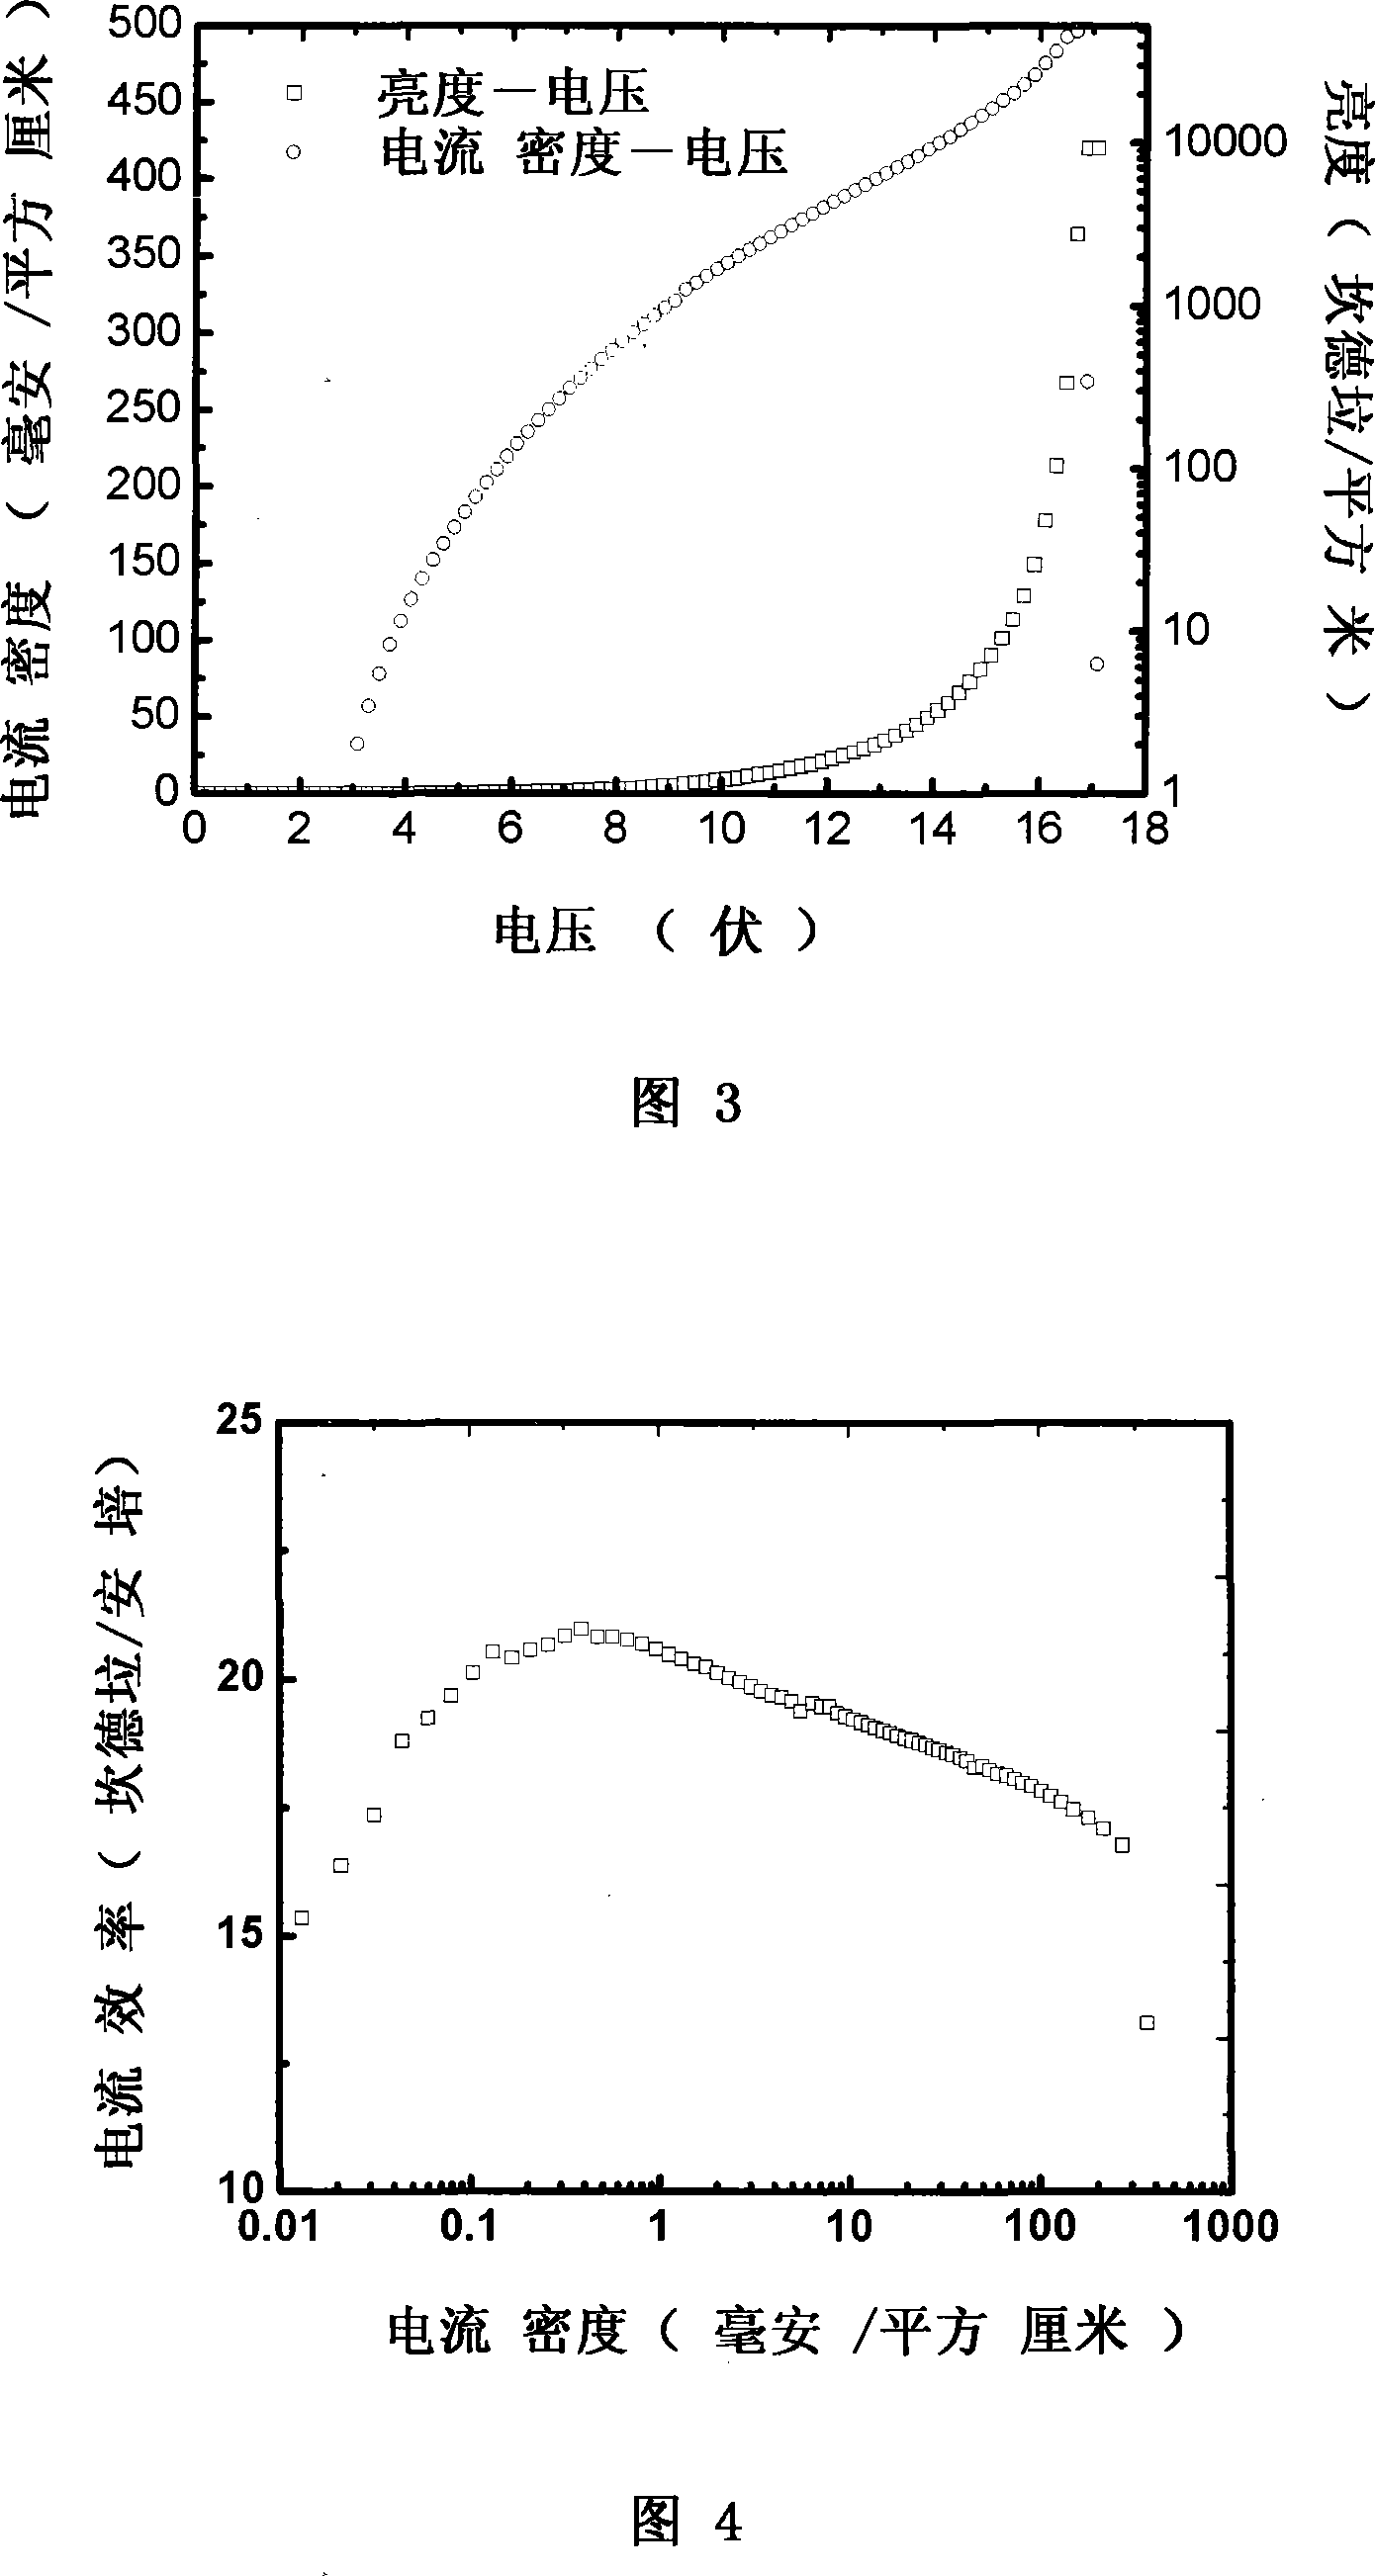 White light organic electroluminescent device and method for fabricating the same based on fluorochrome